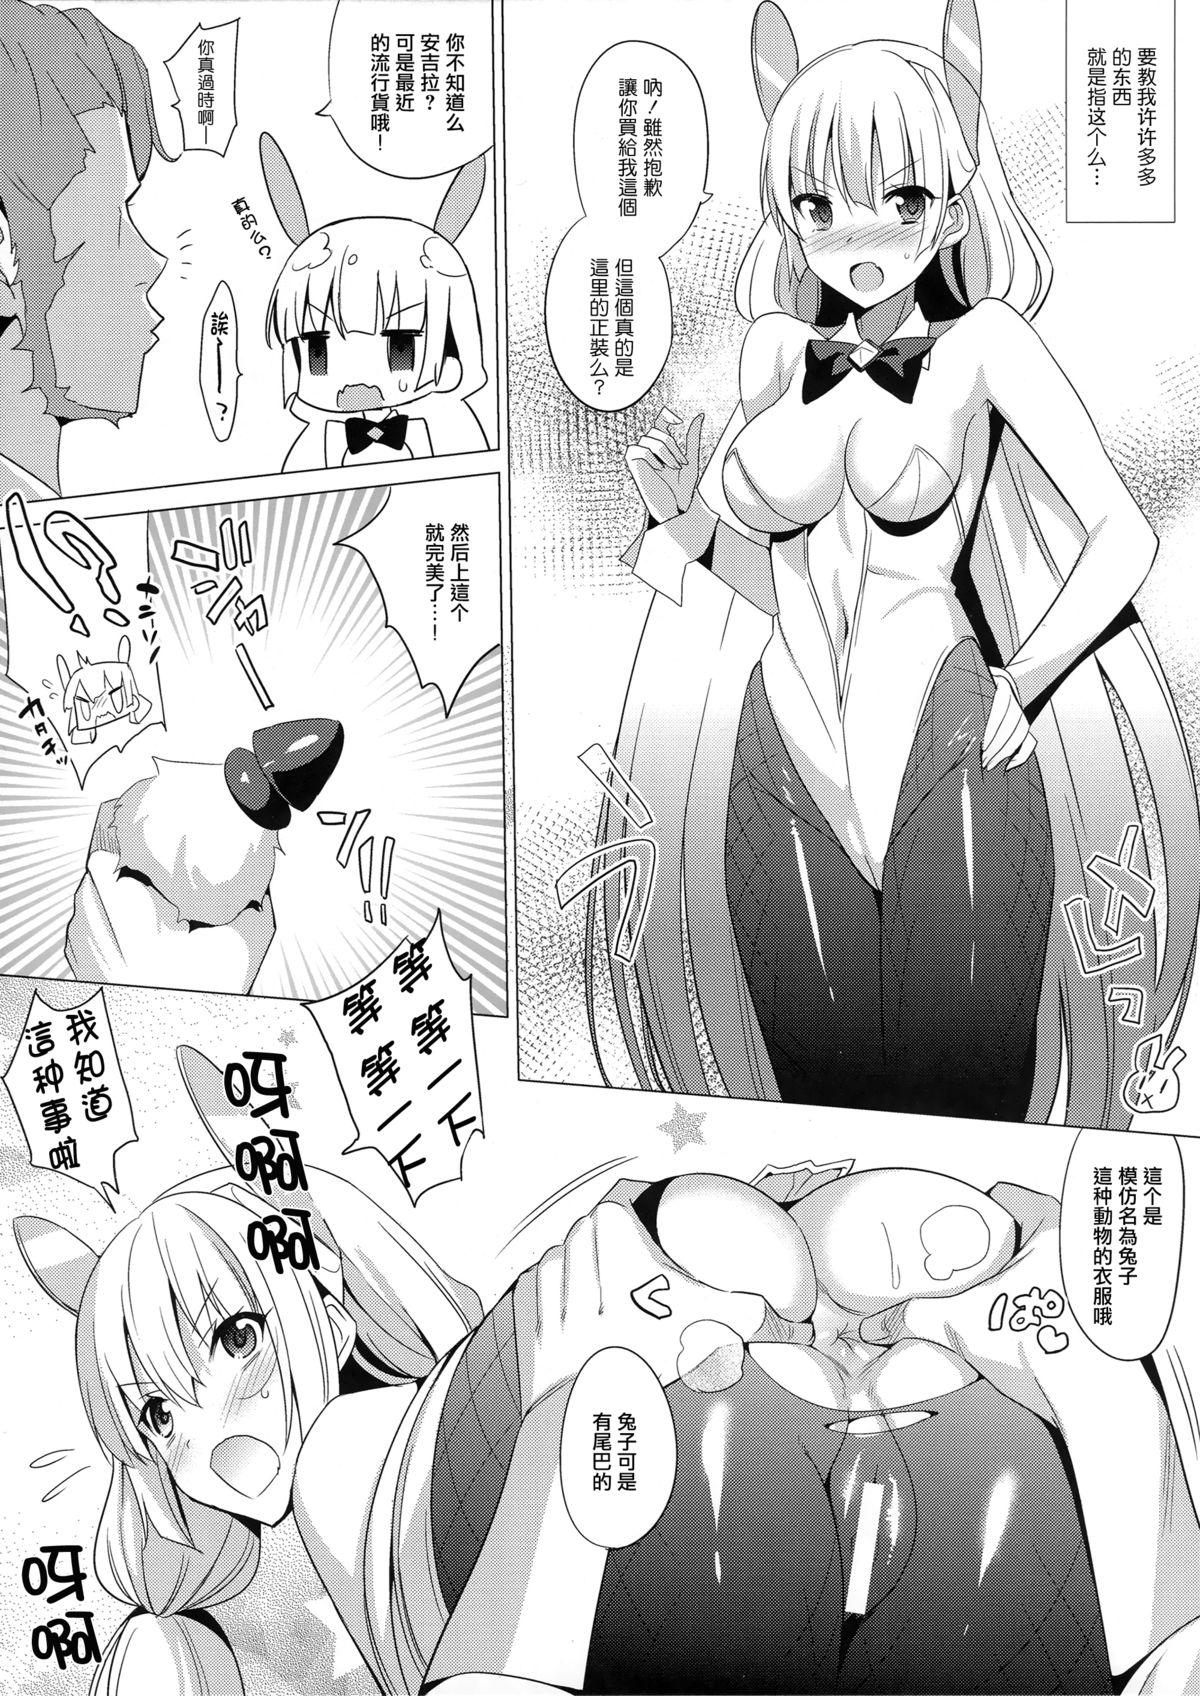 Petite Teen Rakuen e Youkoso 2 First Rabbit - Expelled from paradise Sis - Page 5